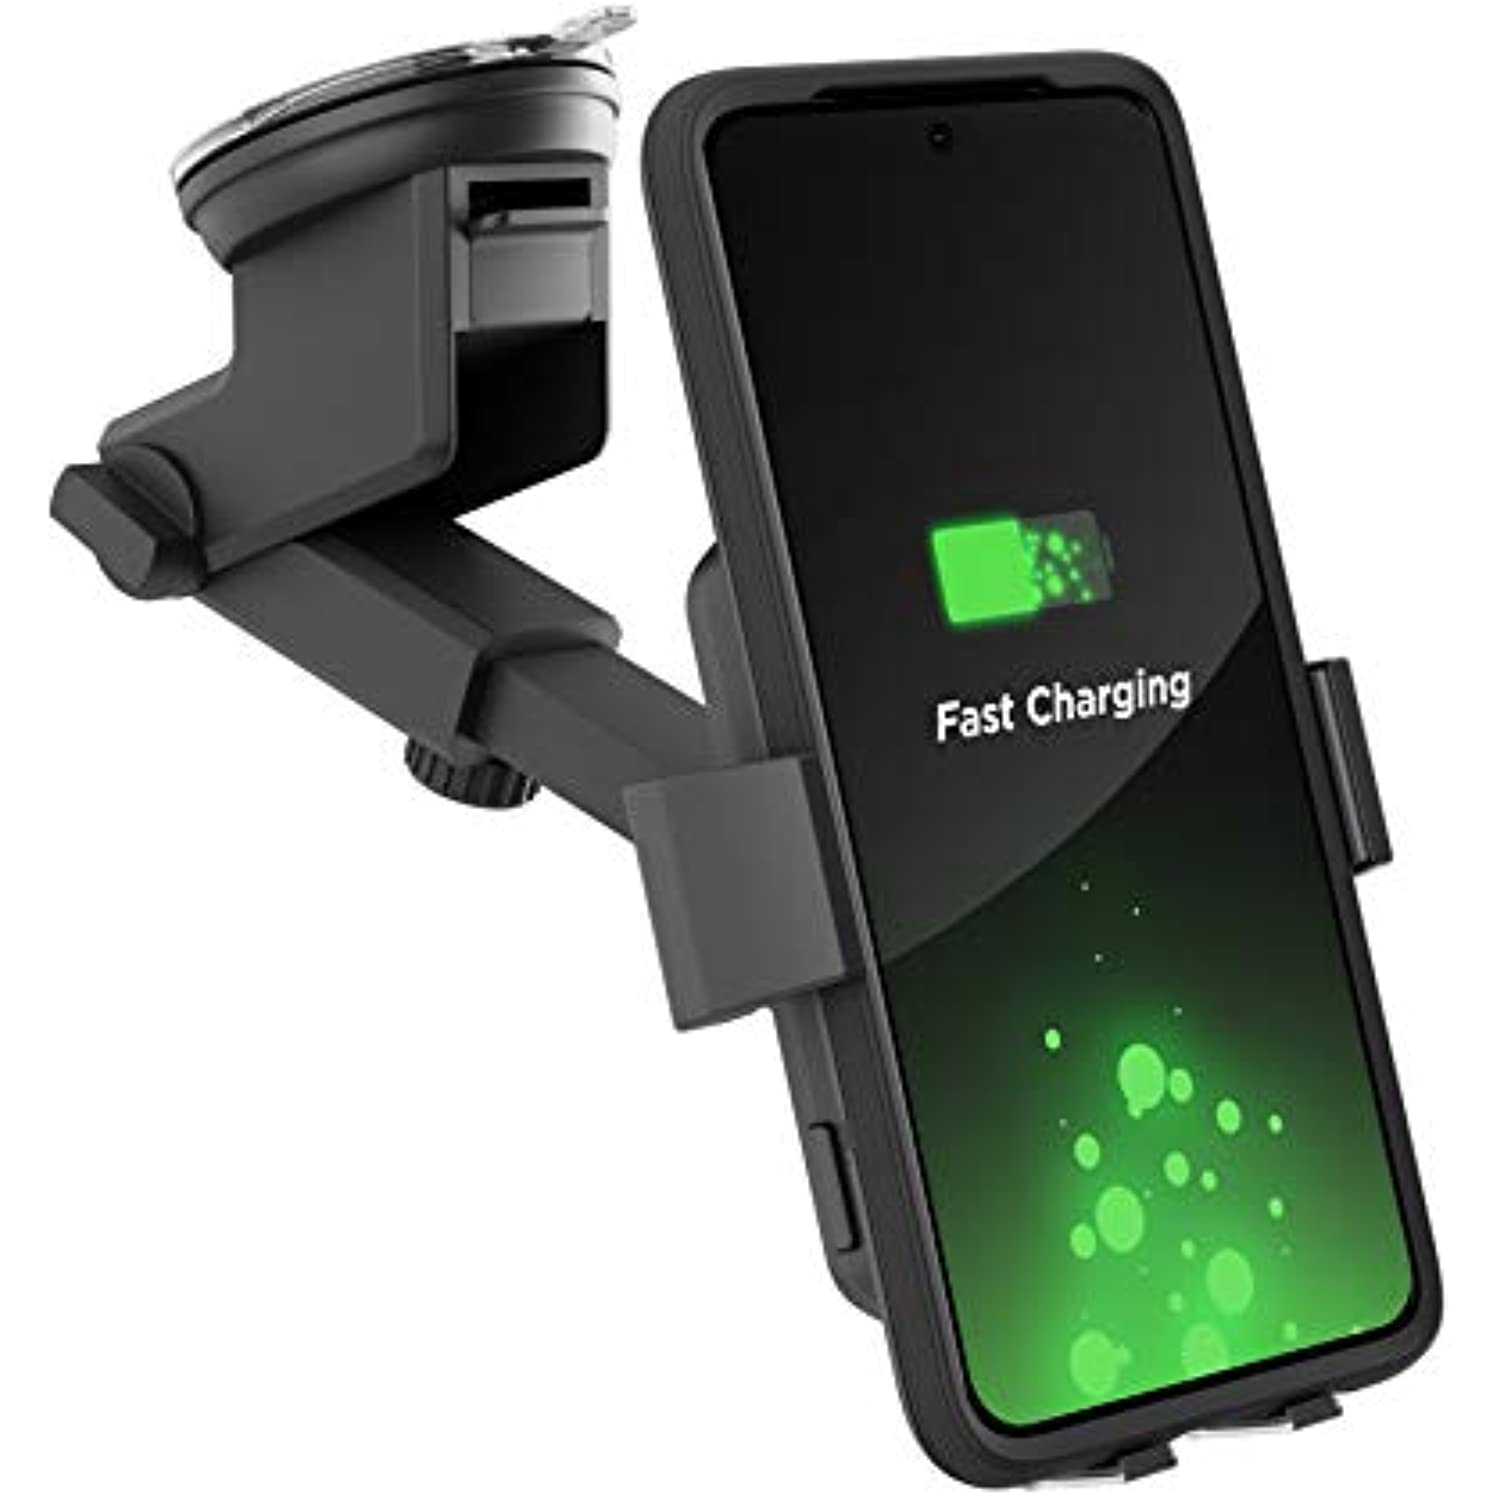 Auto Clamping Fast Charging Qi Holder for Galaxy S23/S22/S21/S20/Plus/Ultra/S10/S9/Note 10/20 Car Mount